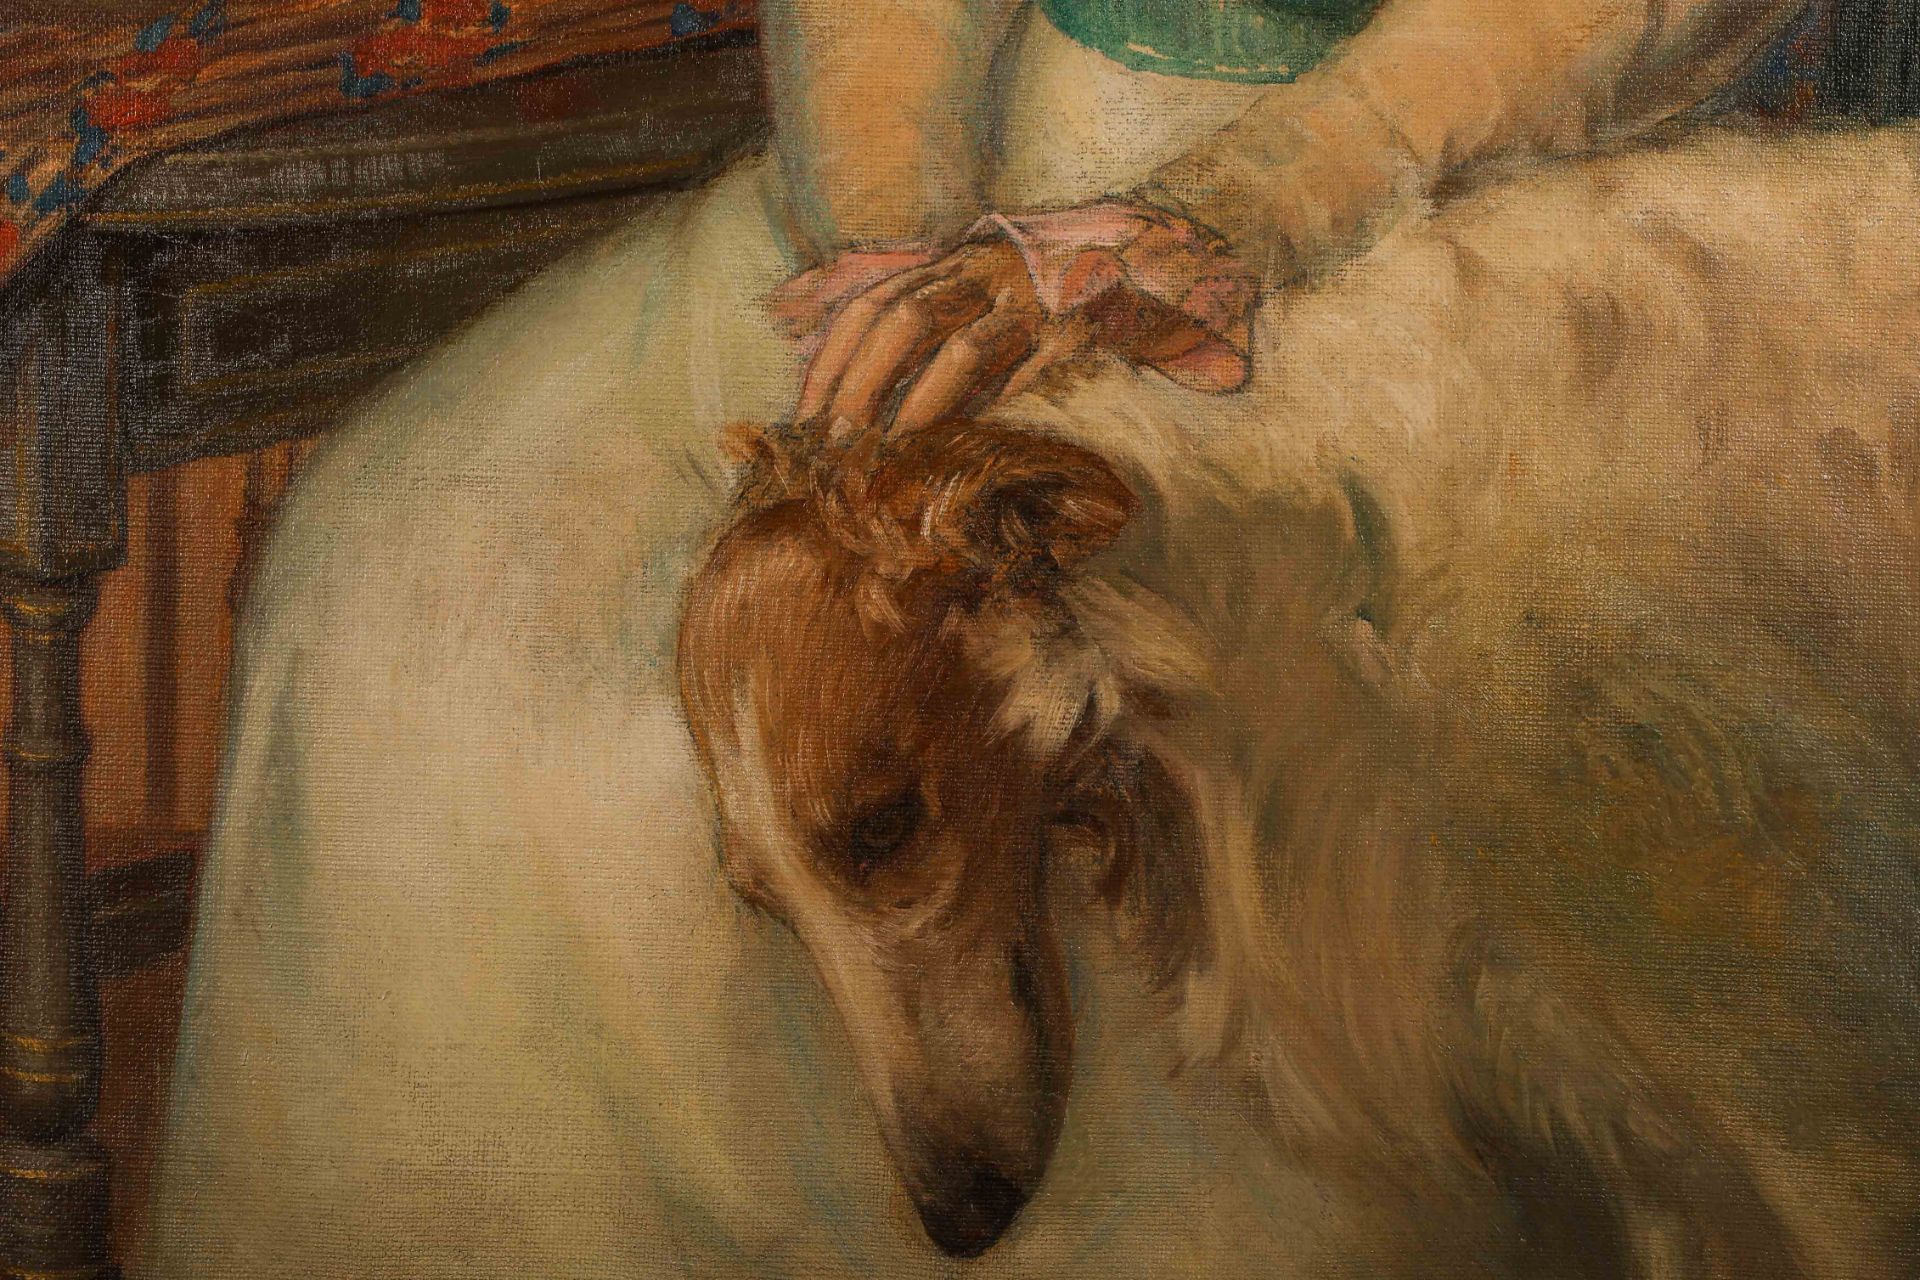 Women and Her Dog
Oil on canvas
（1876-1966，USA，by Joseph Mortimer Lichtenauer Jr） - Image 4 of 9